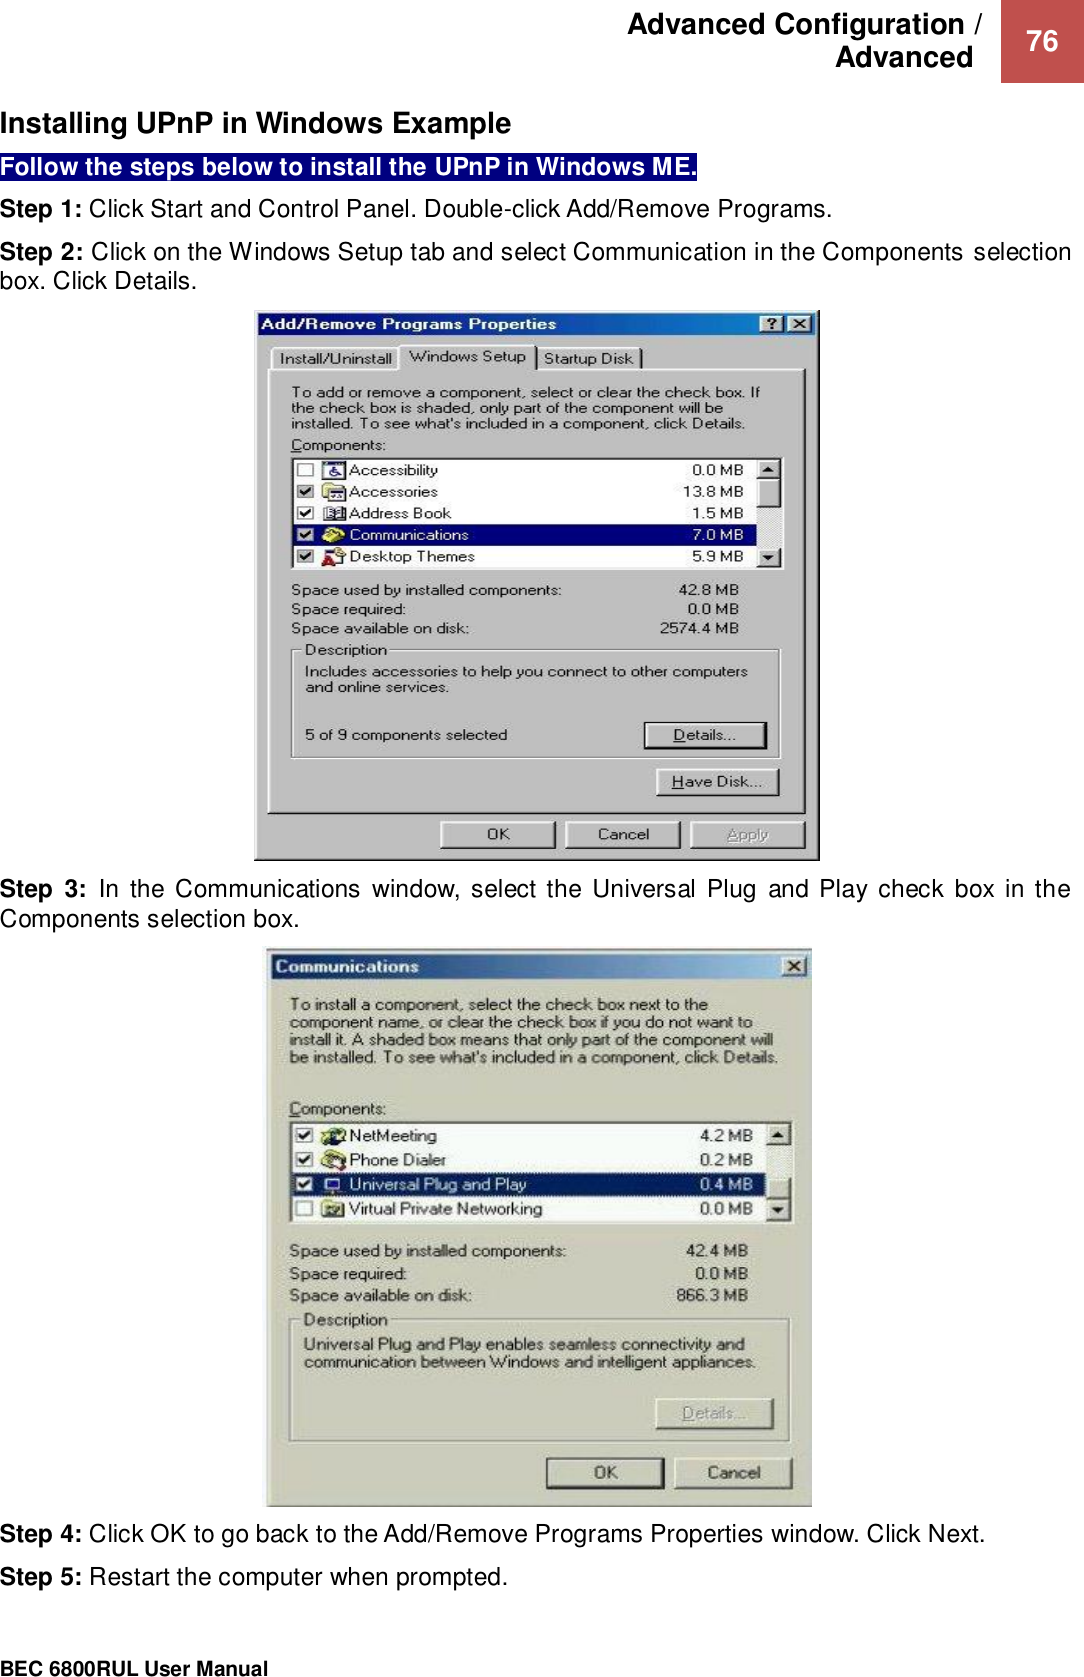 Advanced Configuration /  Advanced   76                                                 BEC 6800RUL User Manual  Installing UPnP in Windows Example Follow the steps below to install the UPnP in Windows ME. Step 1: Click Start and Control Panel. Double-click Add/Remove Programs. Step 2: Click on the Windows Setup tab and select Communication in the Components selection box. Click Details.  Step  3:  In  the Communications  window, select the Universal  Plug  and Play check  box in the Components selection box.   Step 4: Click OK to go back to the Add/Remove Programs Properties window. Click Next. Step 5: Restart the computer when prompted. 